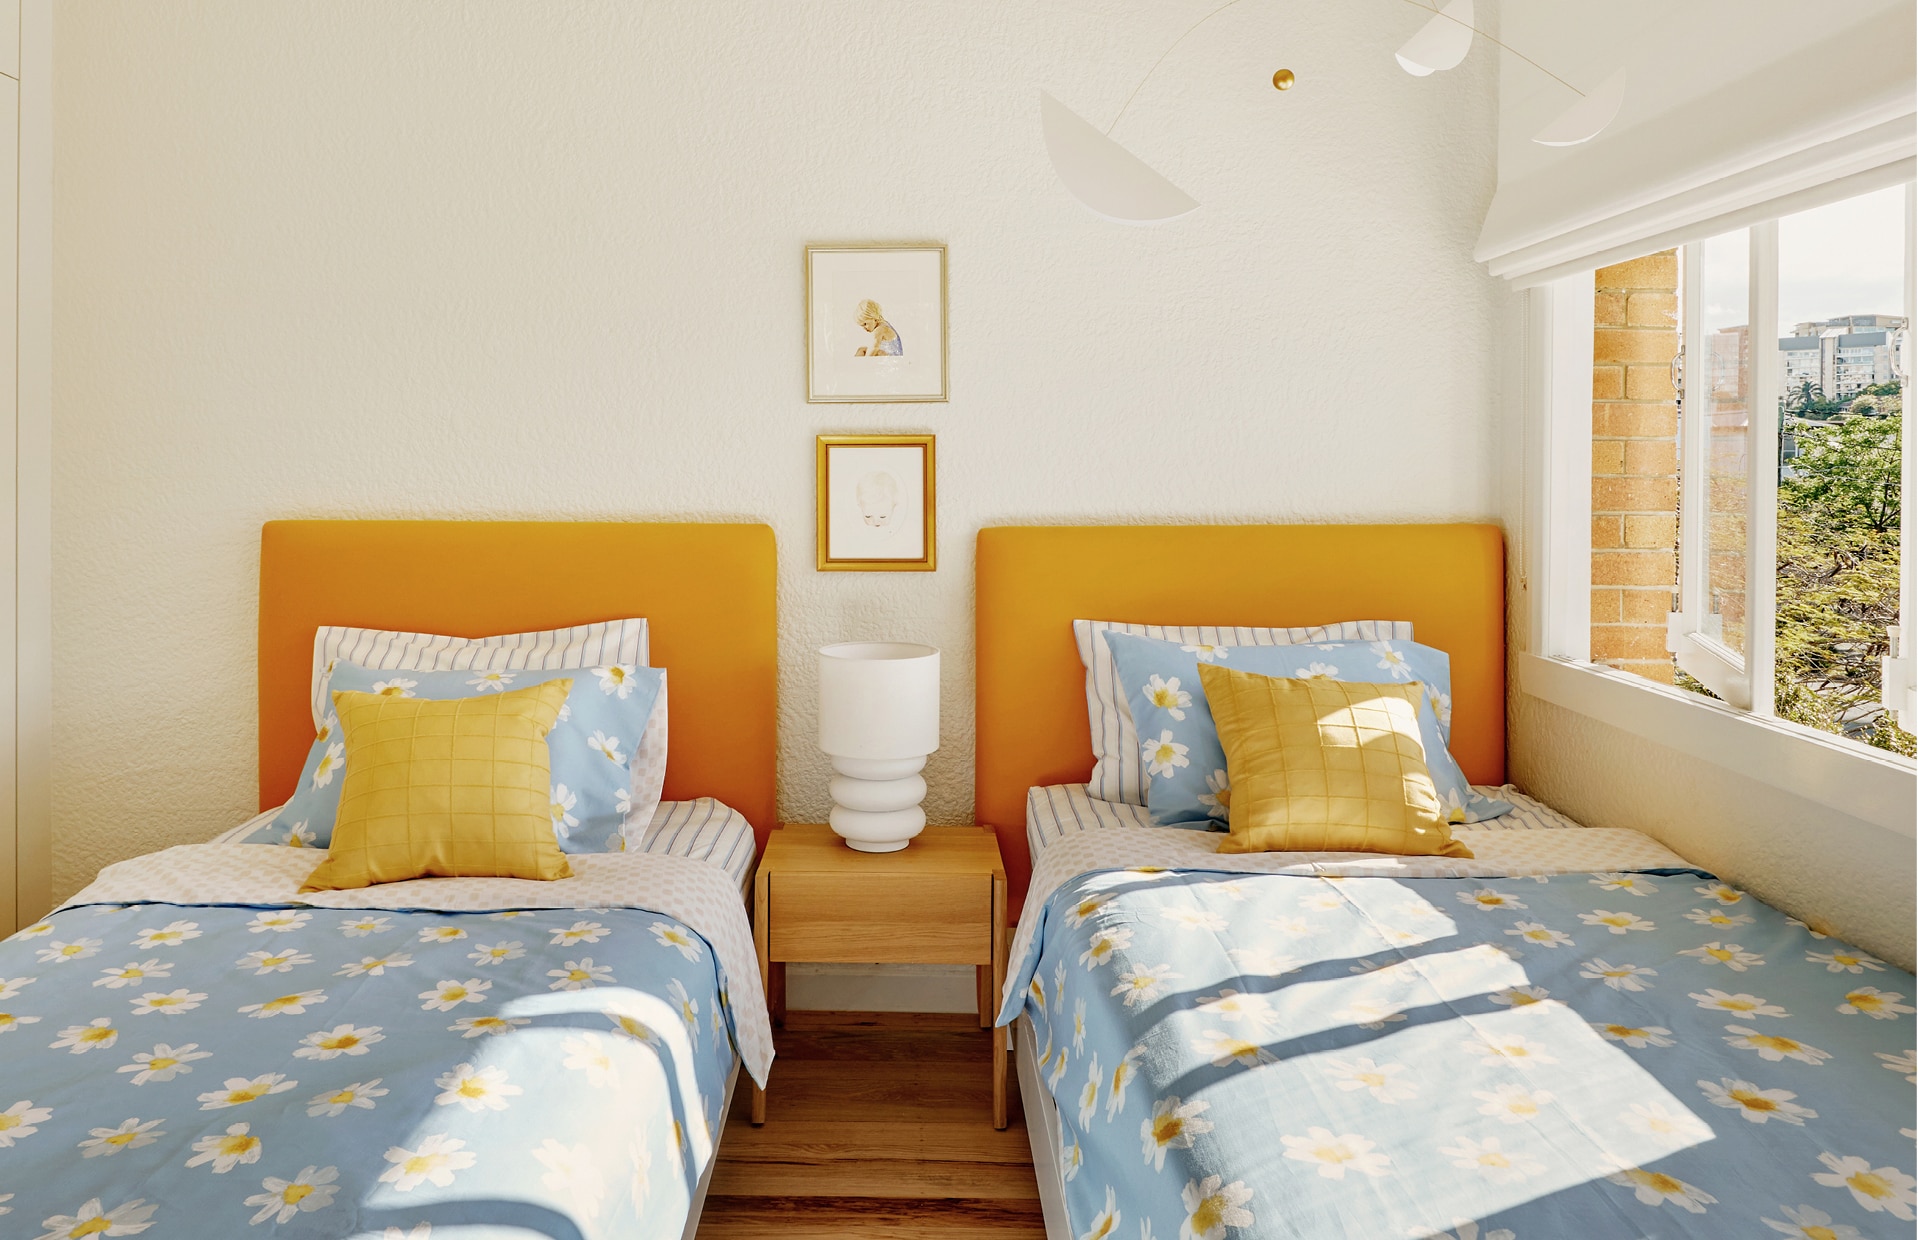 landscape image of pip's kids bedroom. two single beds are styled identially. citrus orange bedhead, striped sheets, and blue quilt cover and pillowcase patterns with daisies. bedside table sits between the beds, with lamp on top. windows to the right.